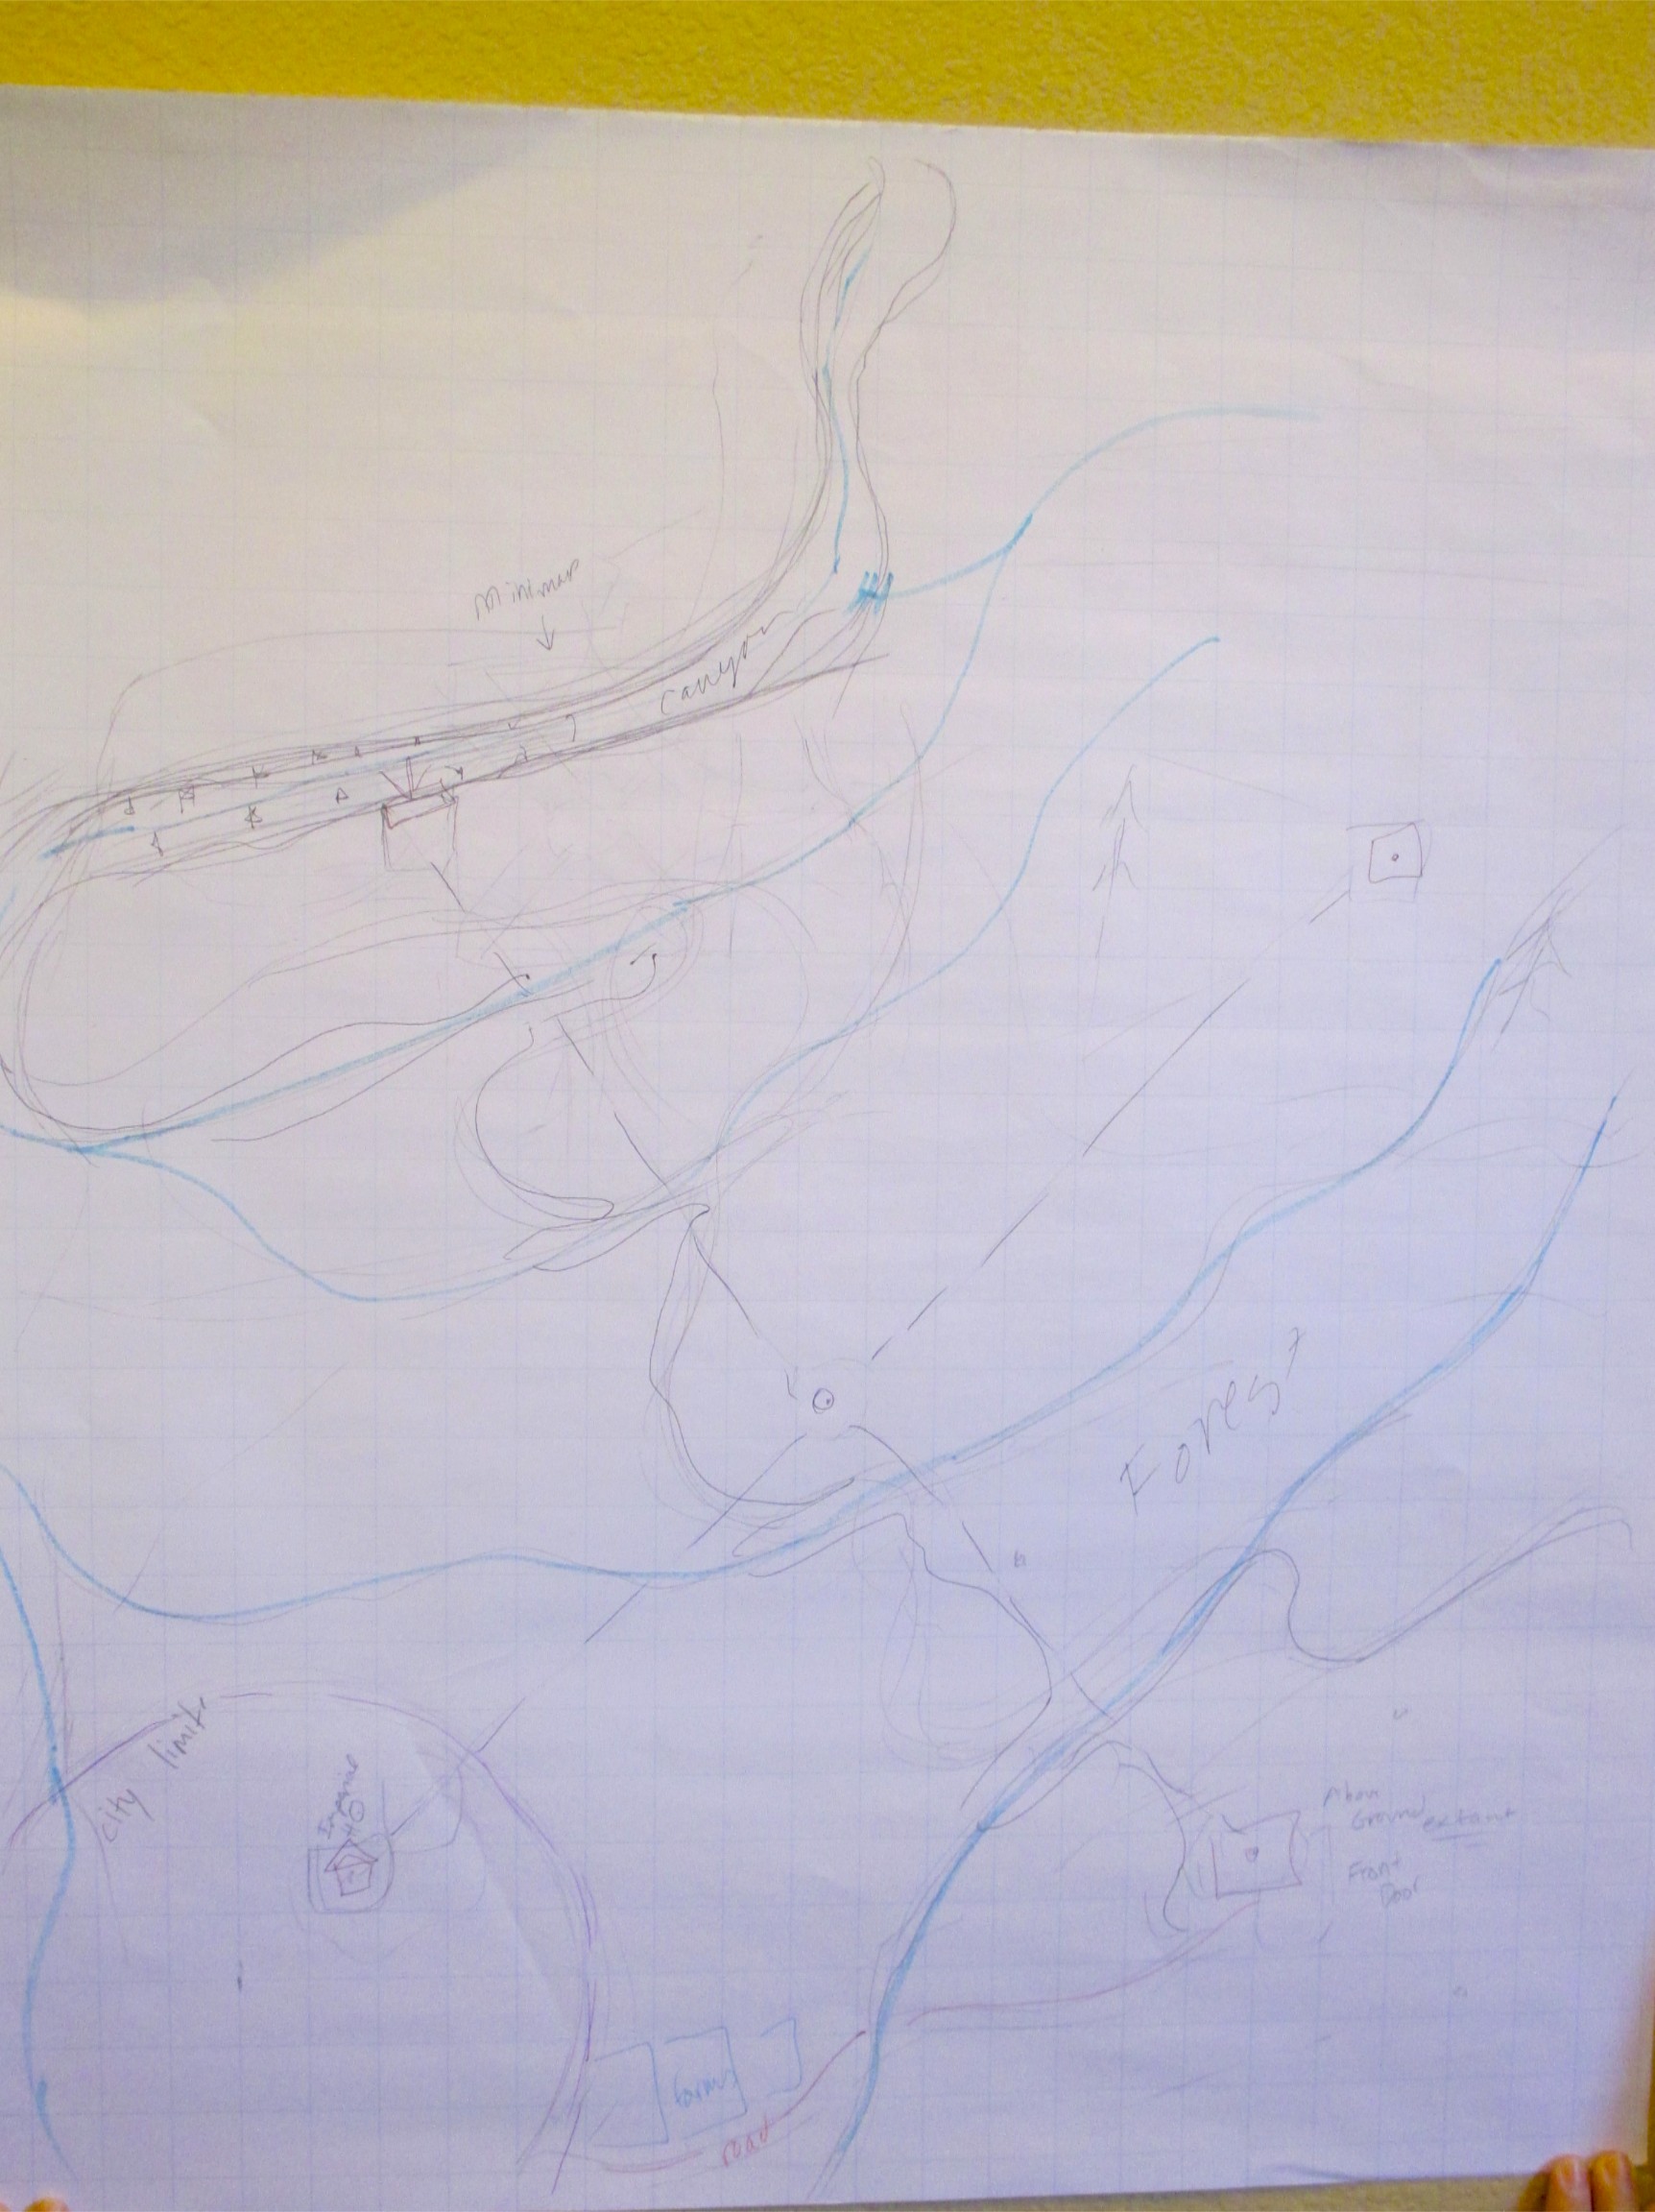 Map Overview Showing Cerebro in relation to the Village (its a town, really, and they're proud of it!), Forest, Anatoki River, and other surrounding terrain.